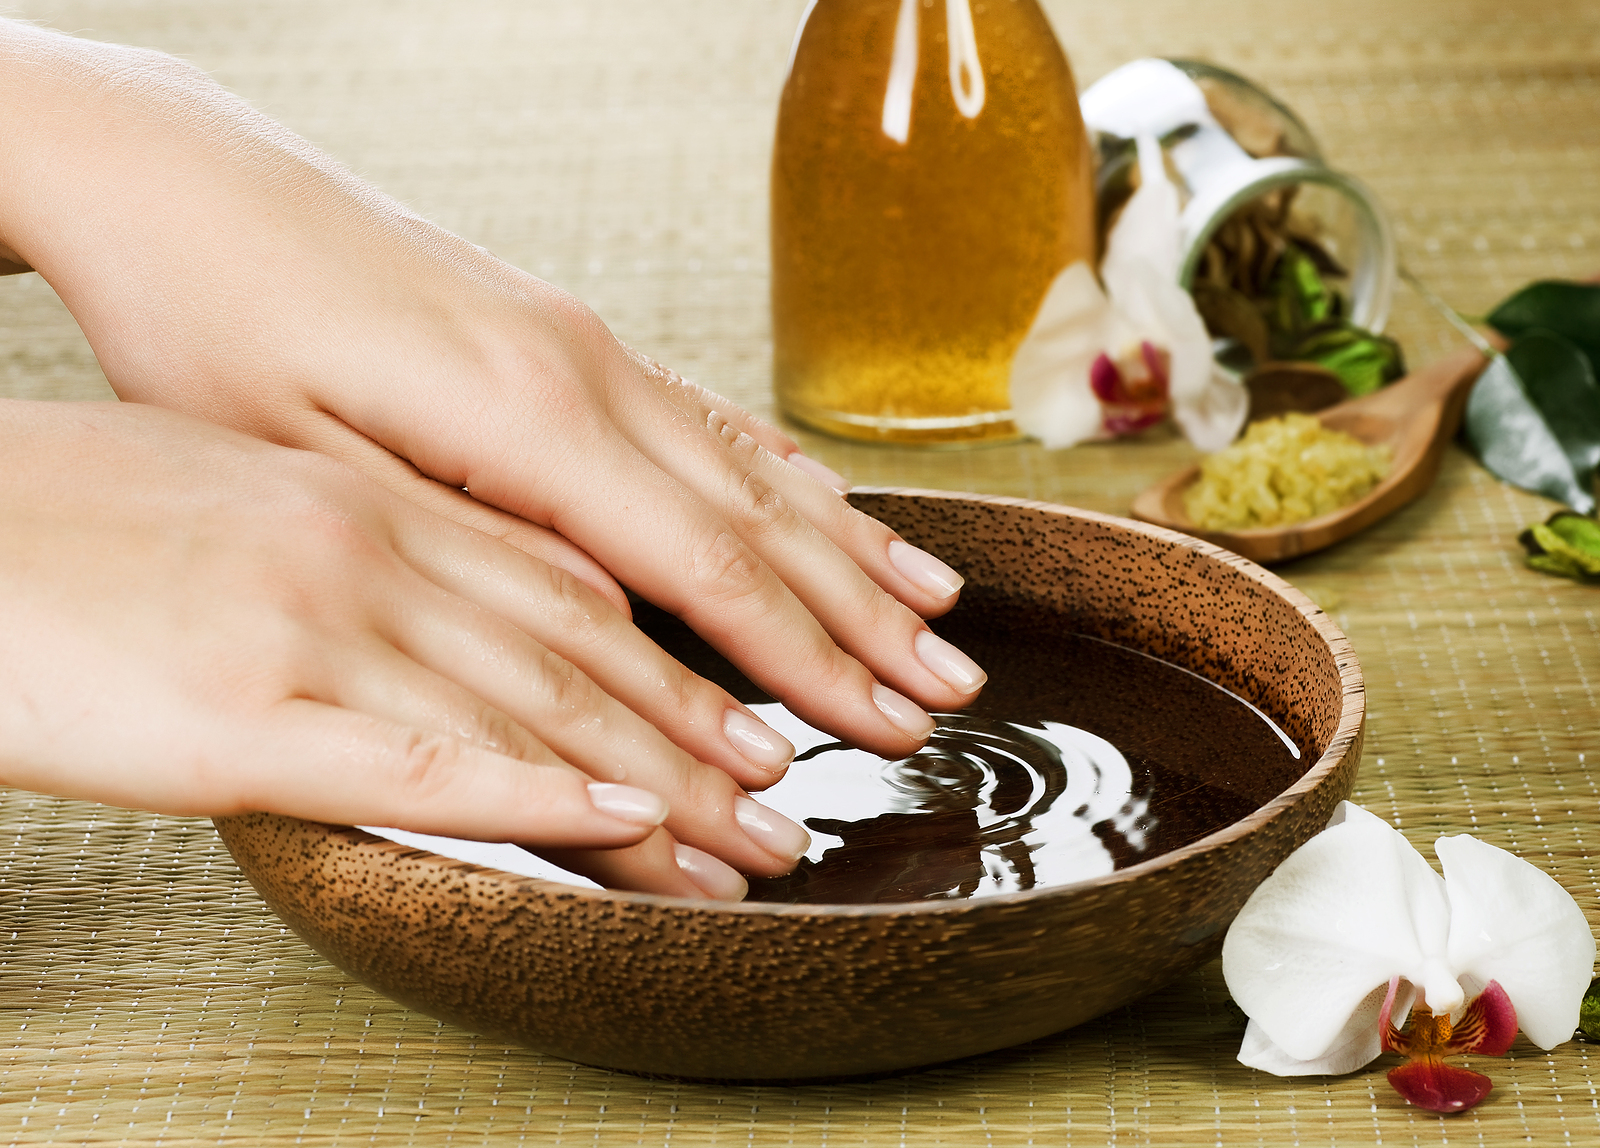 Nail Salon Atlanta Helps You In Taking Care Of Your Nails